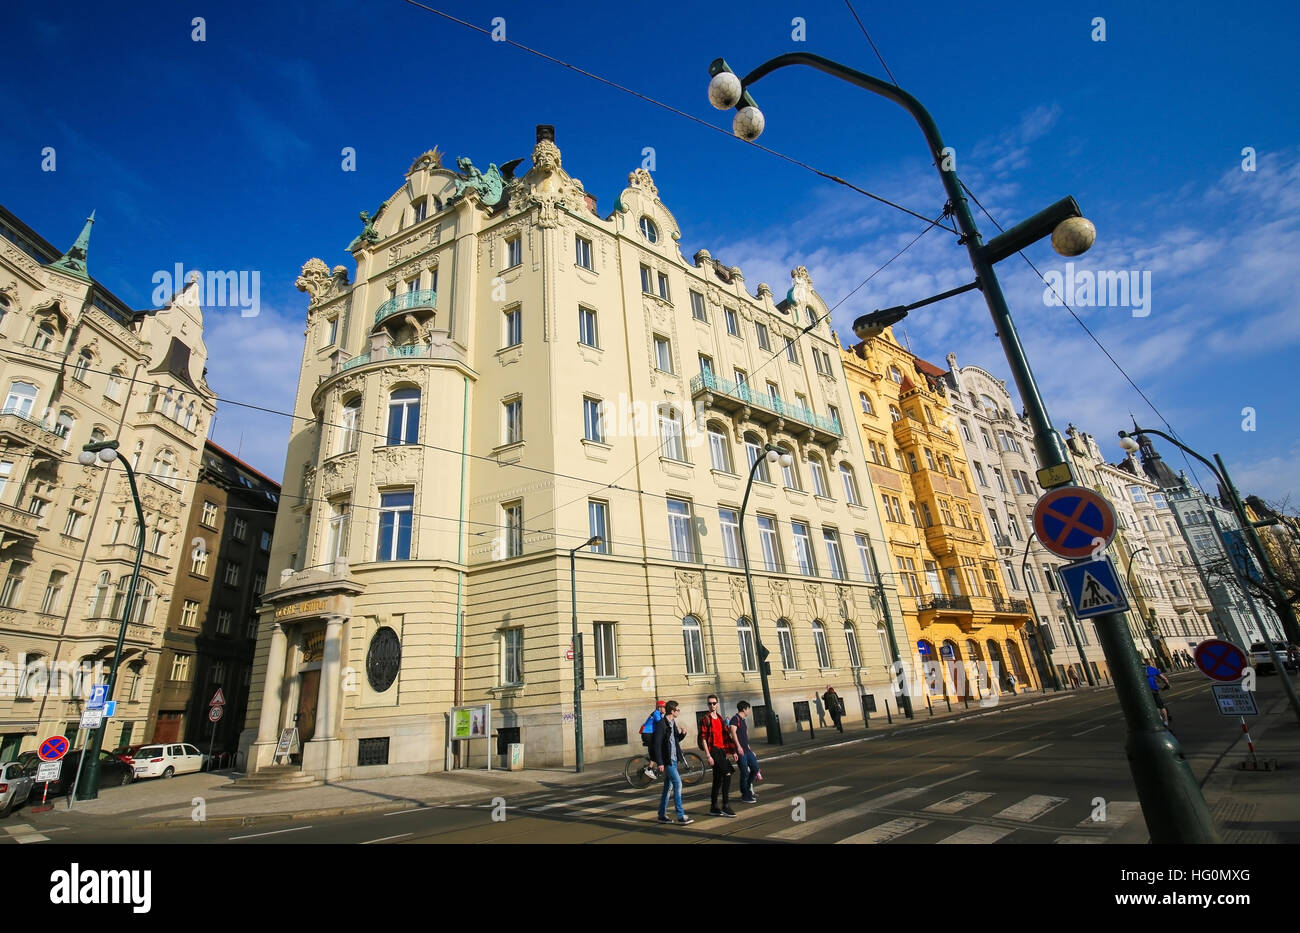 Typical architecture of Nove Mesto or New Town in Prague, Czech Republic Stock Photo